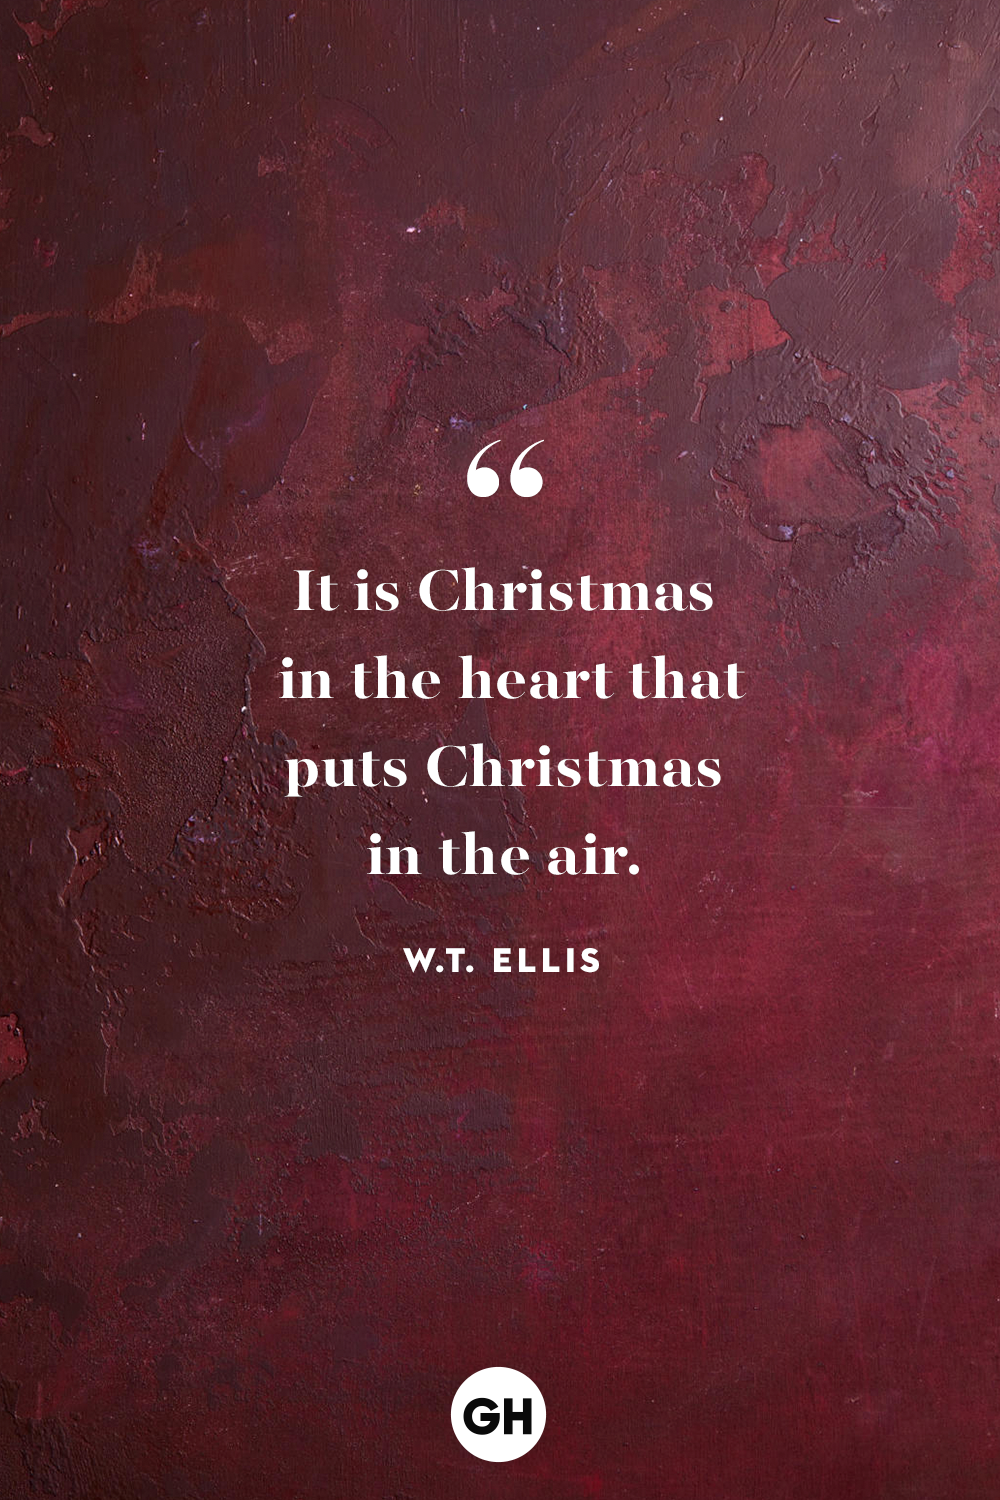 Christmas inspirational quotes about life